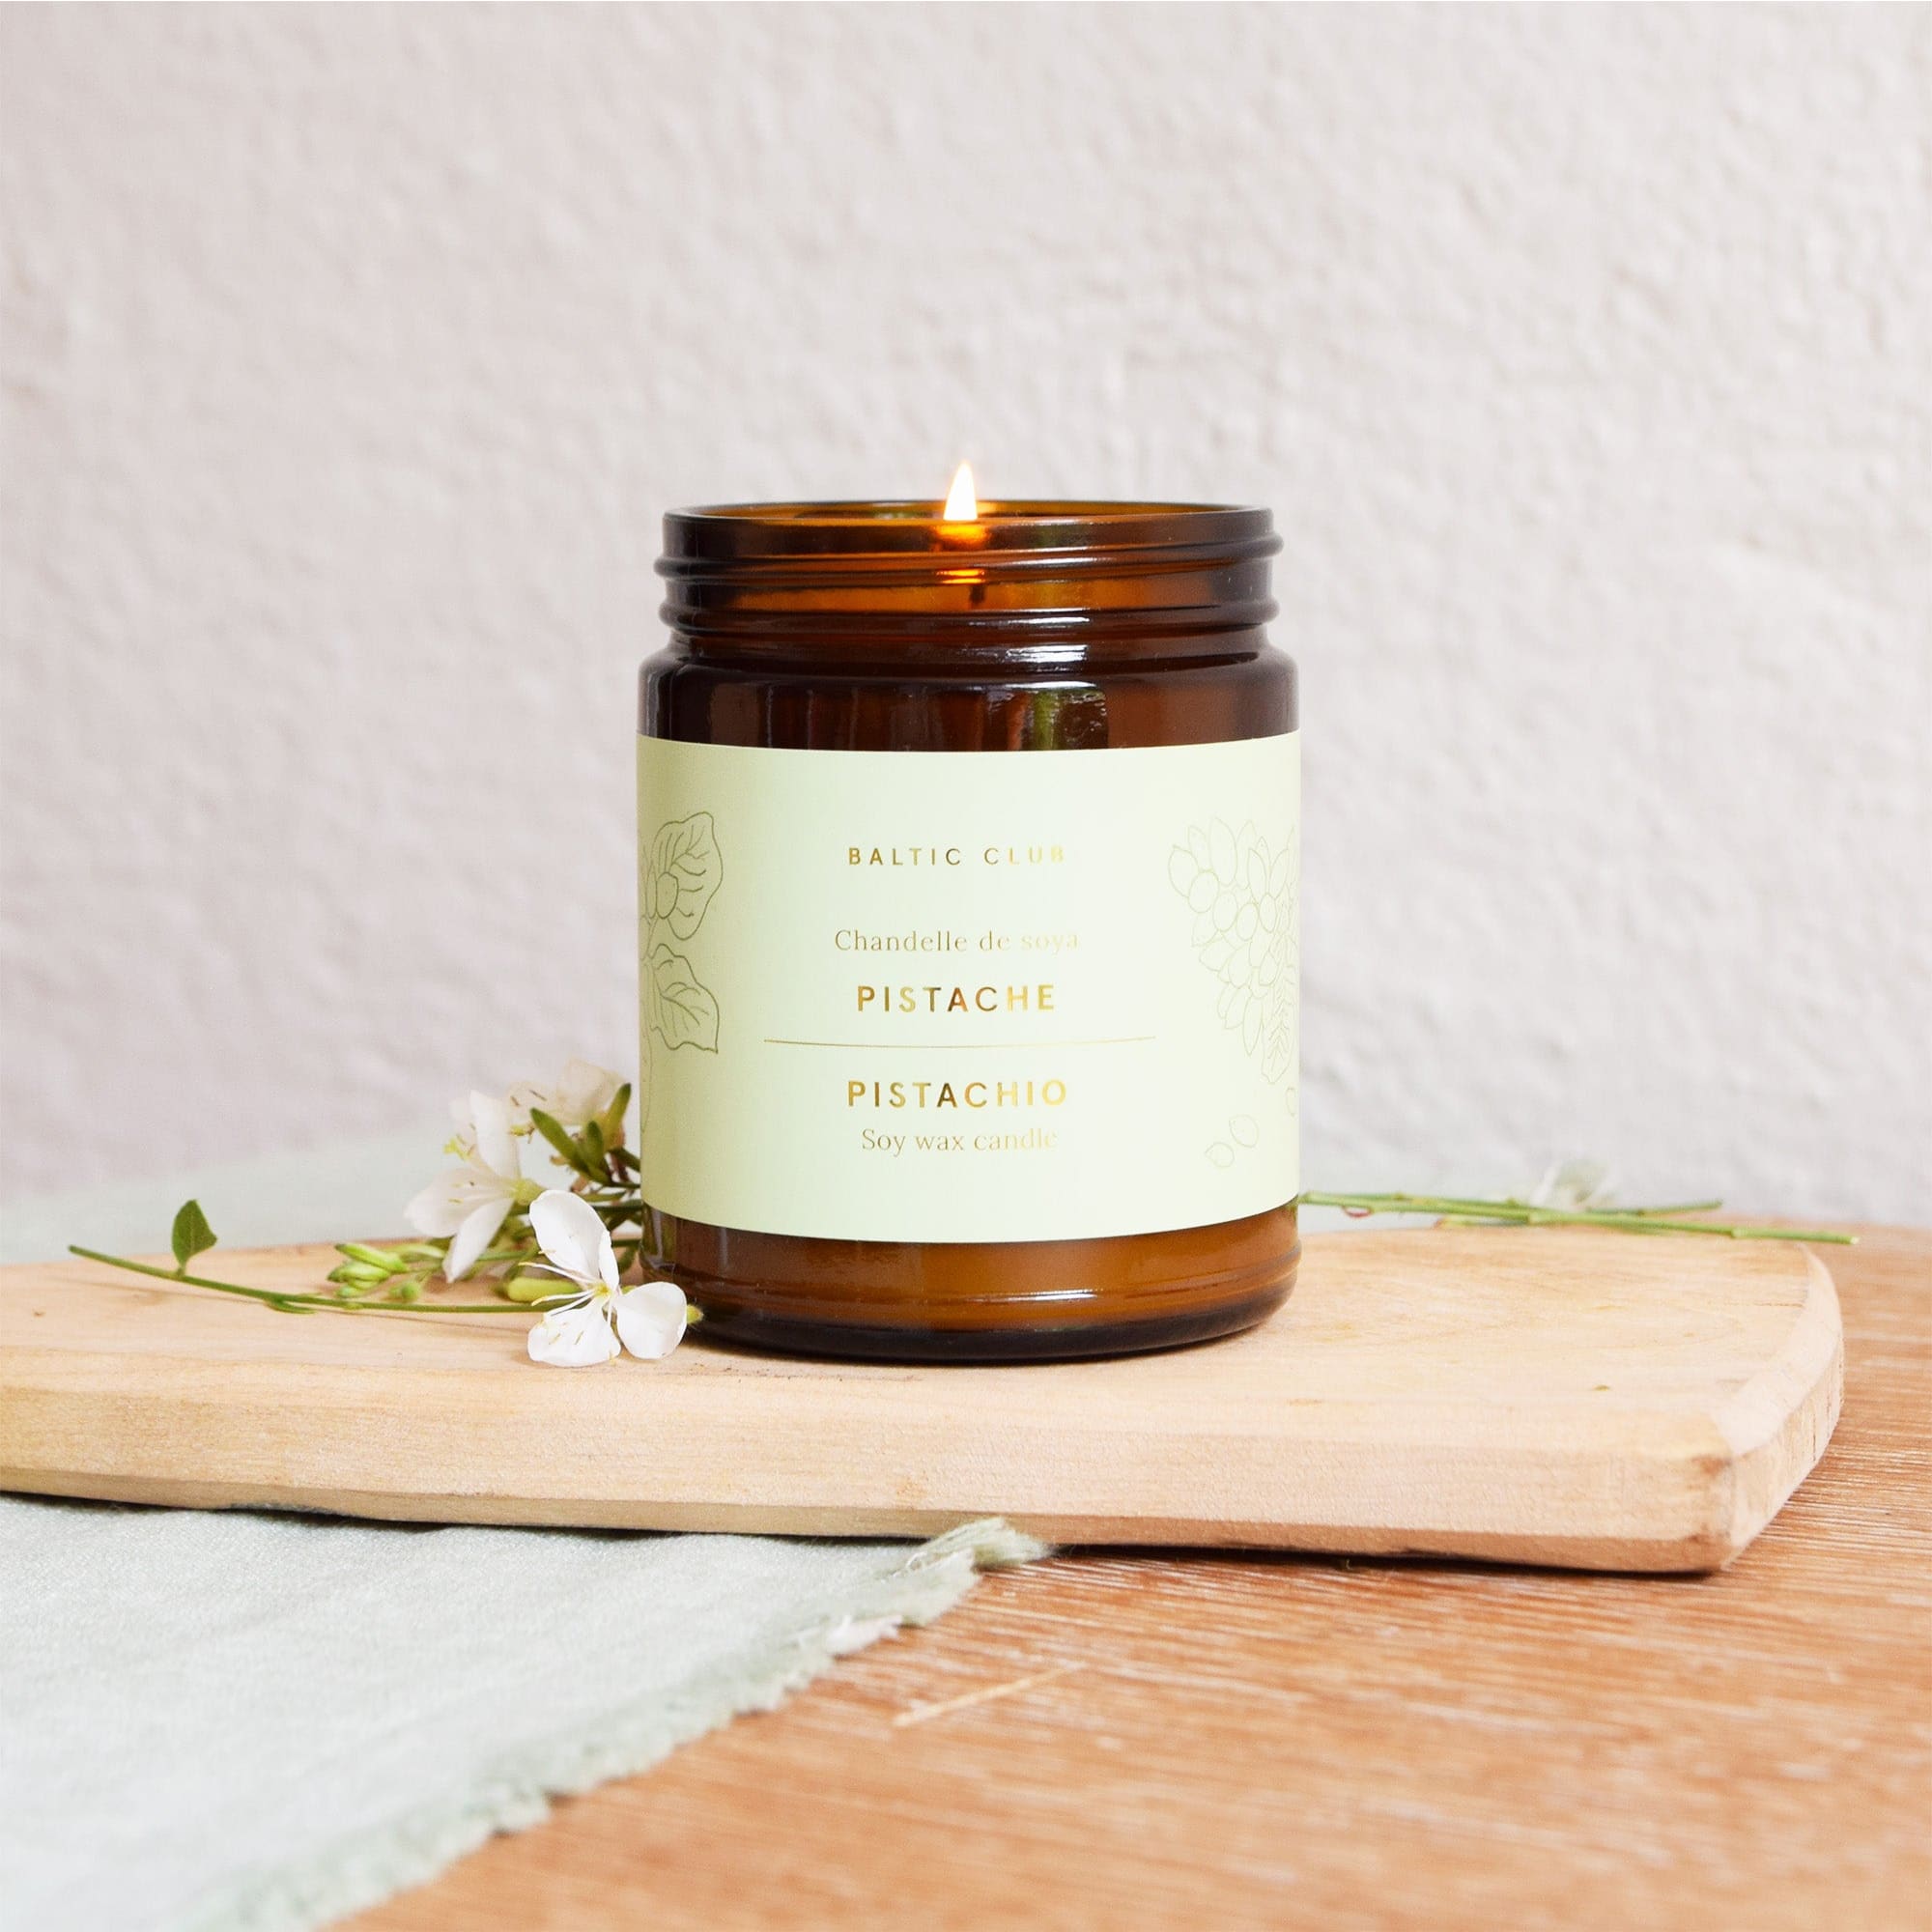 Pistachio Soy Candle | The Baltic Club